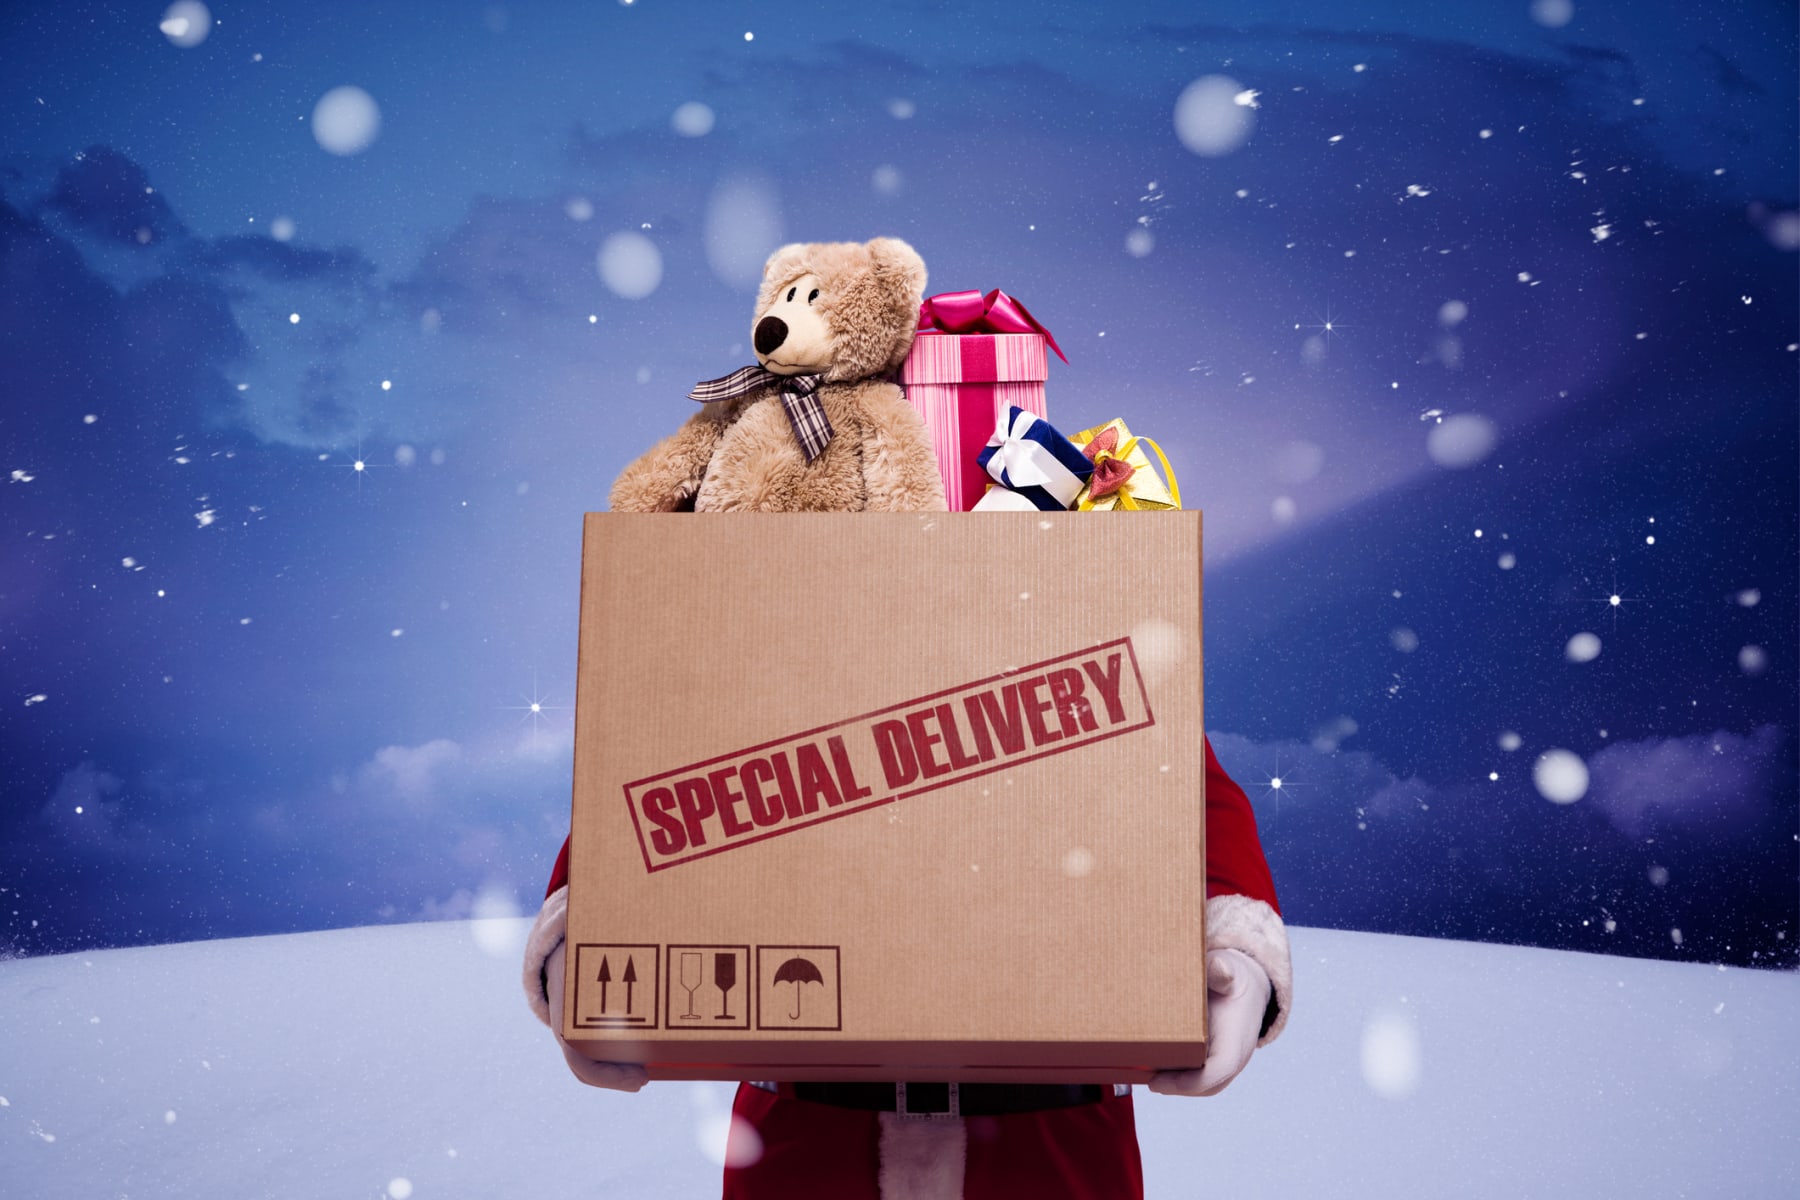 Santa Claus holding a Special Delivery cardboard box filled with toys.